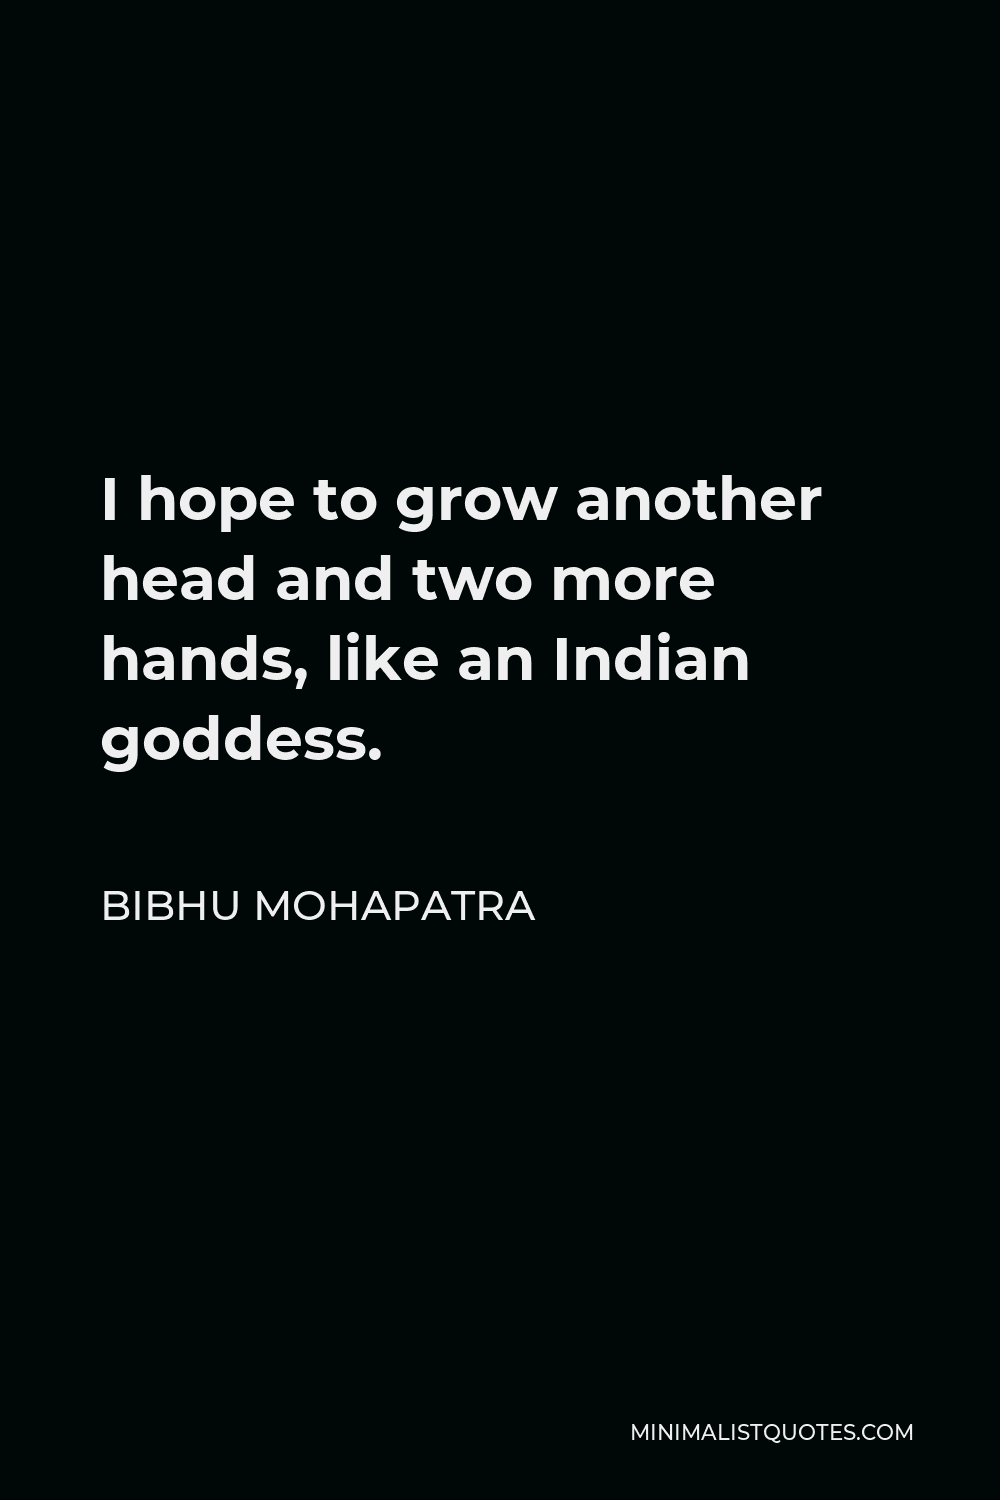 Bibhu Mohapatra Quote - I hope to grow another head and two more hands, like an Indian goddess.